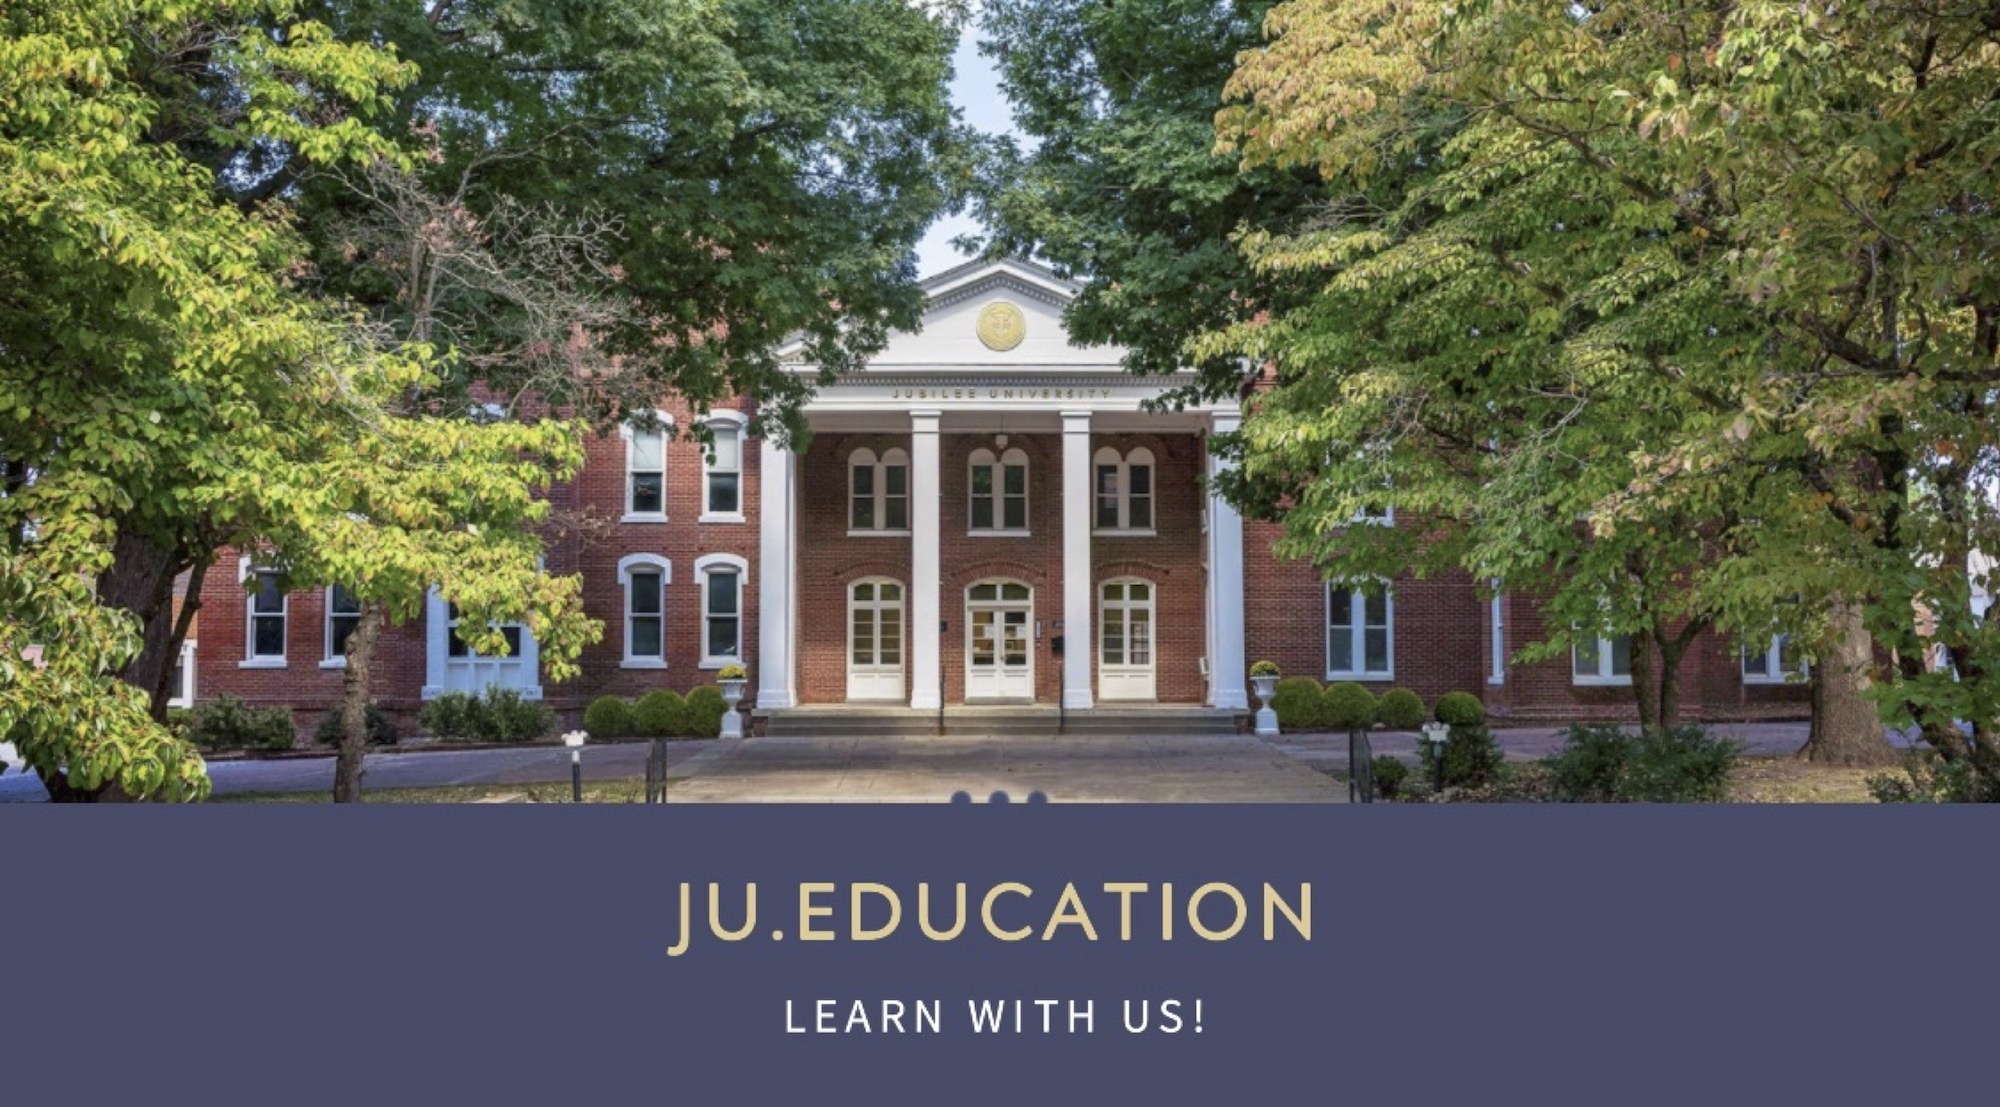 JU.EDUCATION Becomes New Home Of Jubilee University